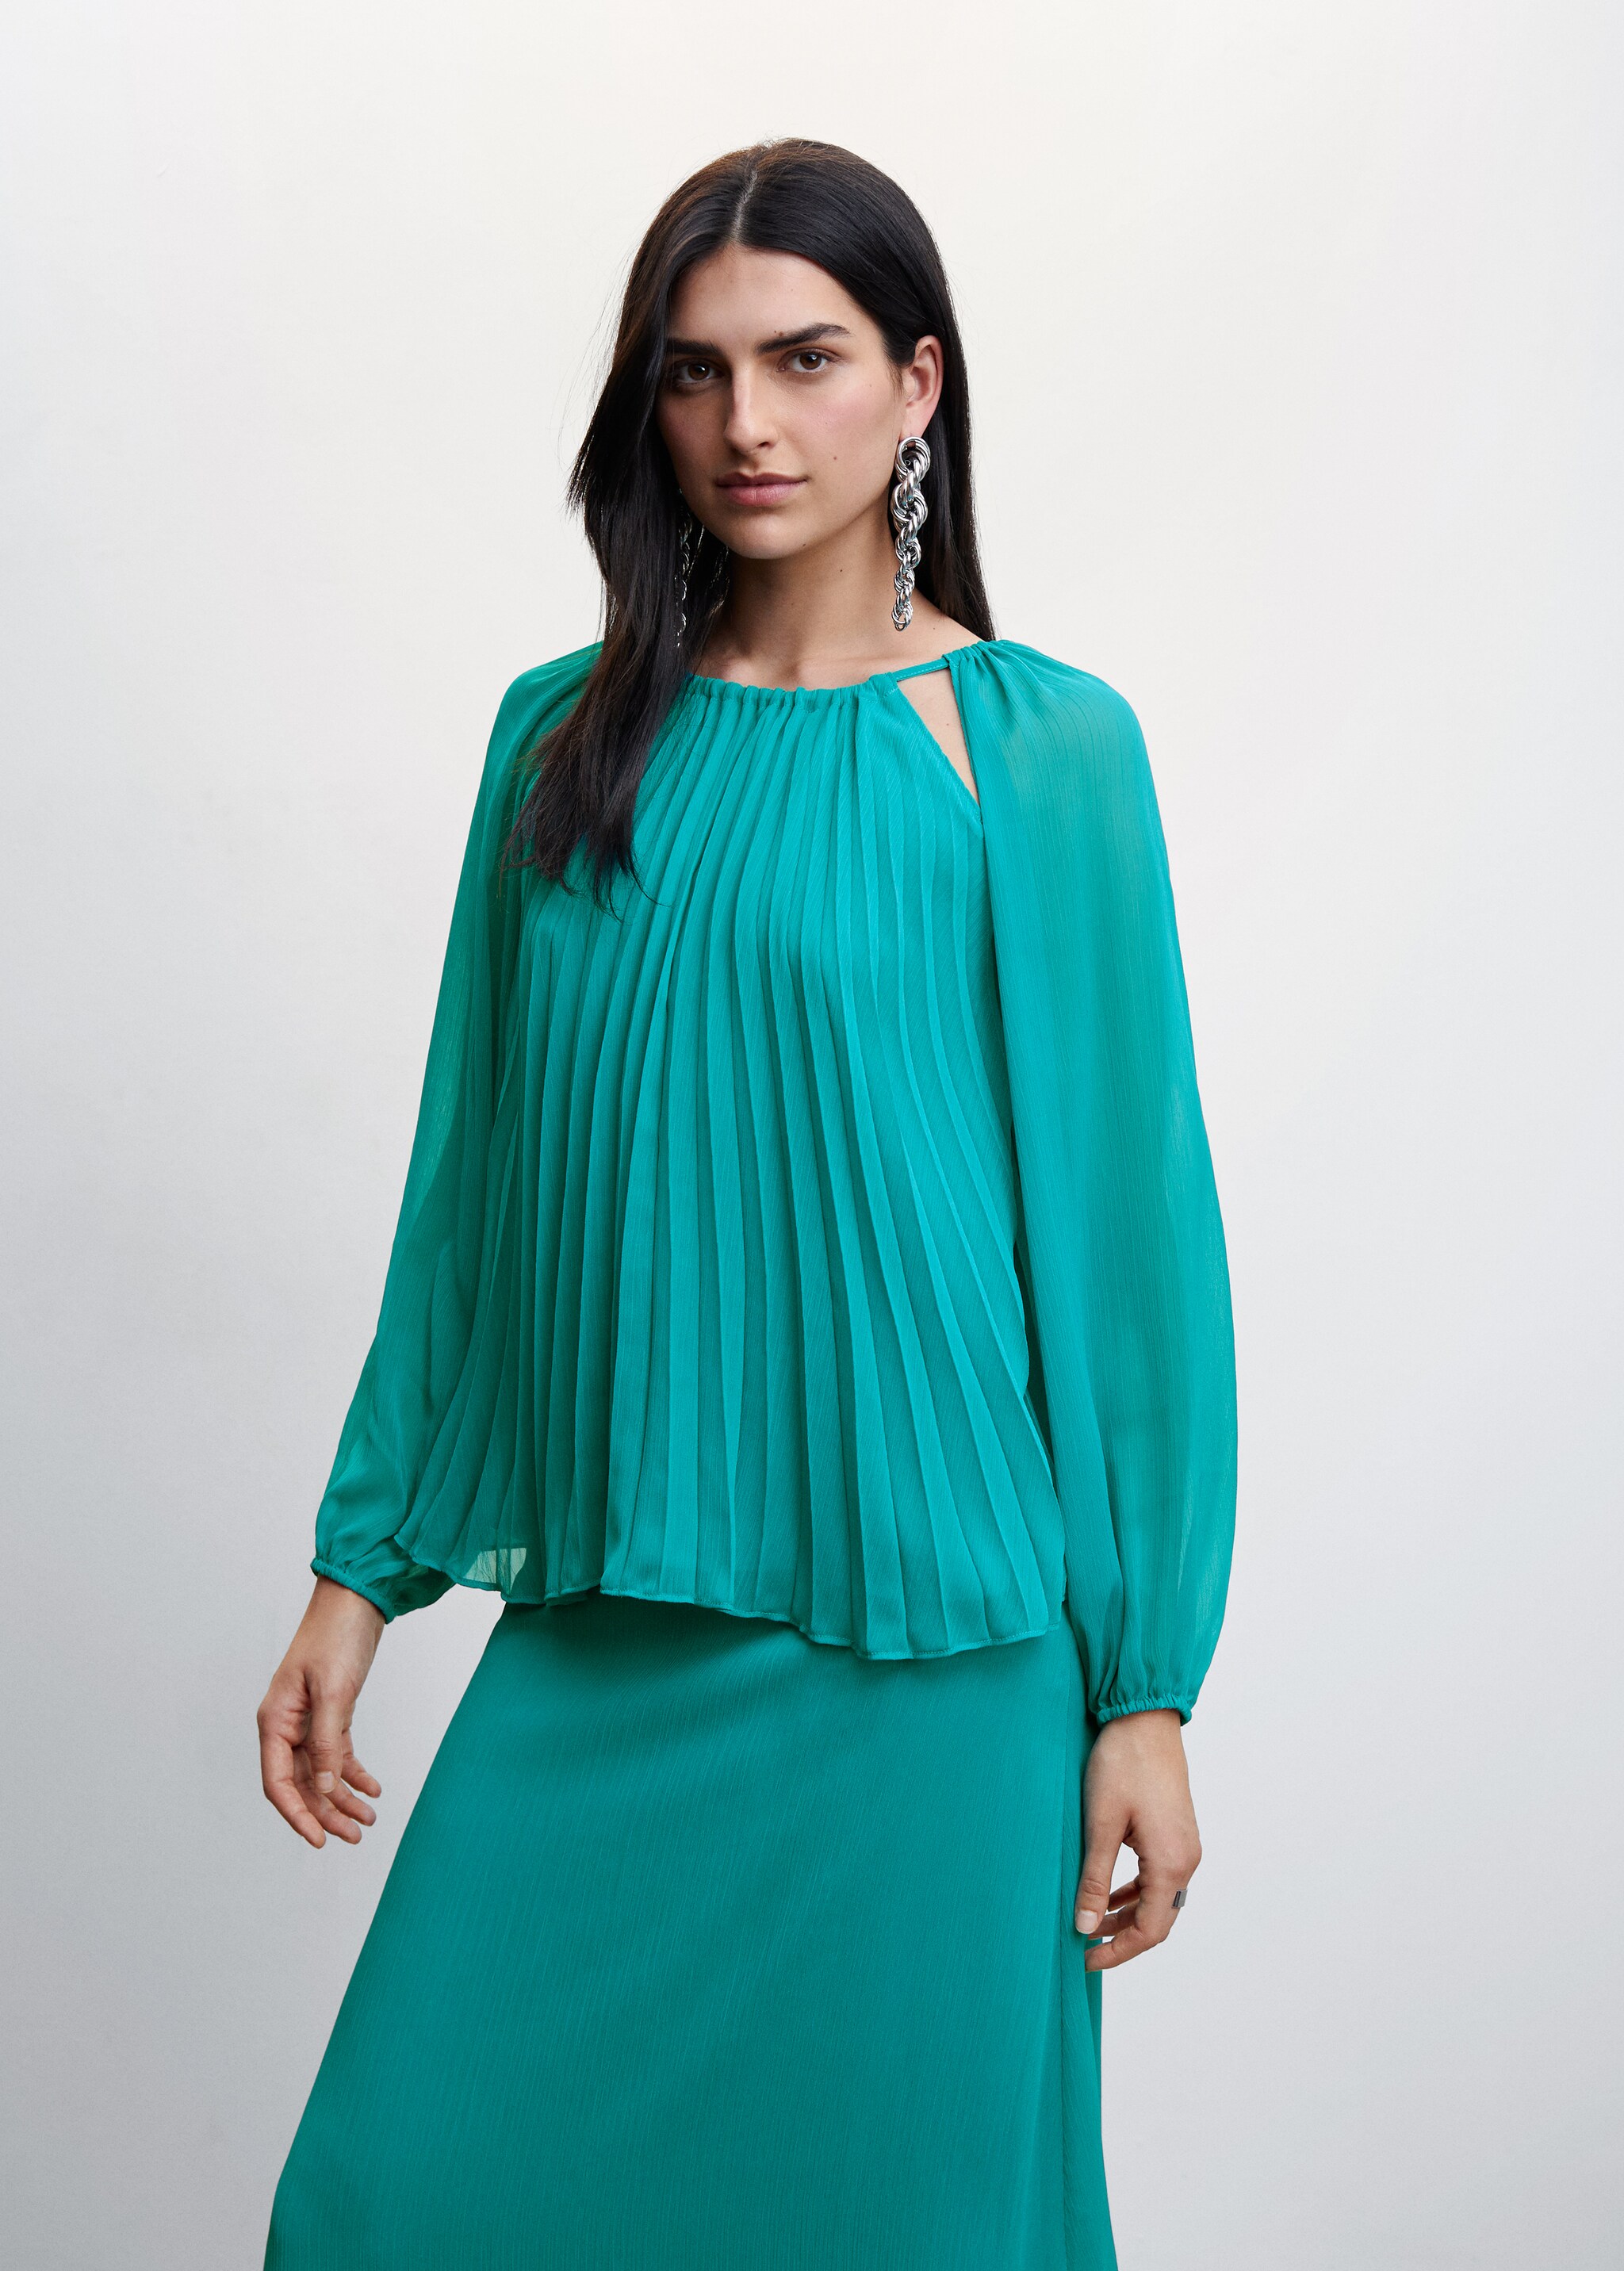 Pleated off-the-shoulder blouse - Medium plane